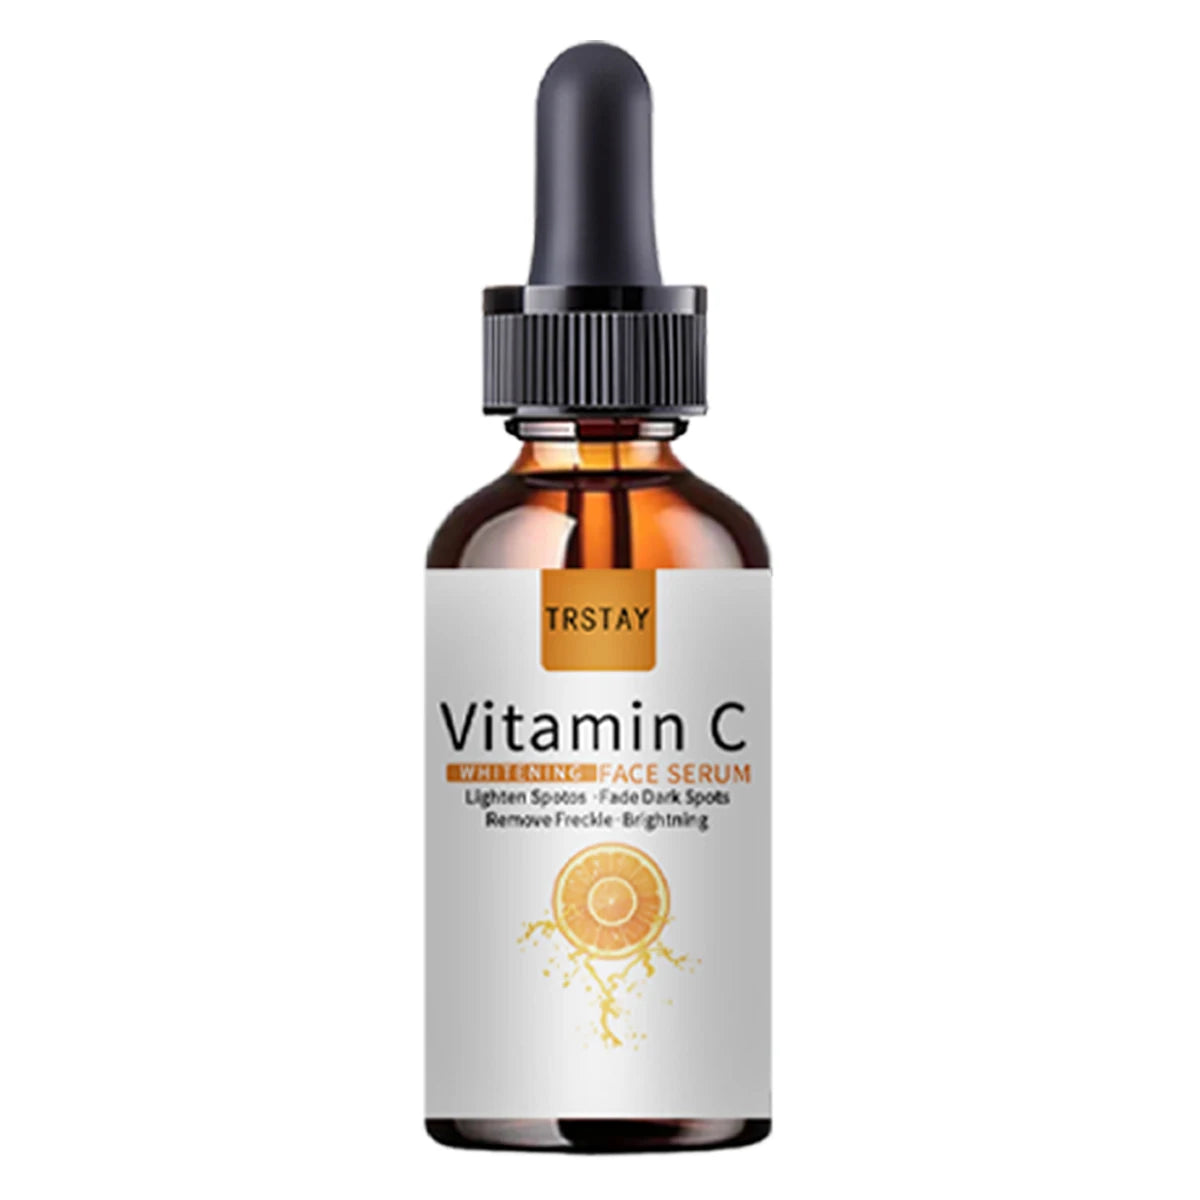 TRSTAY Vitamin C Serum For Face Moisturizing Brightens Skin Repair Smooth Facial Essence Serum Facial Care Skincare Products